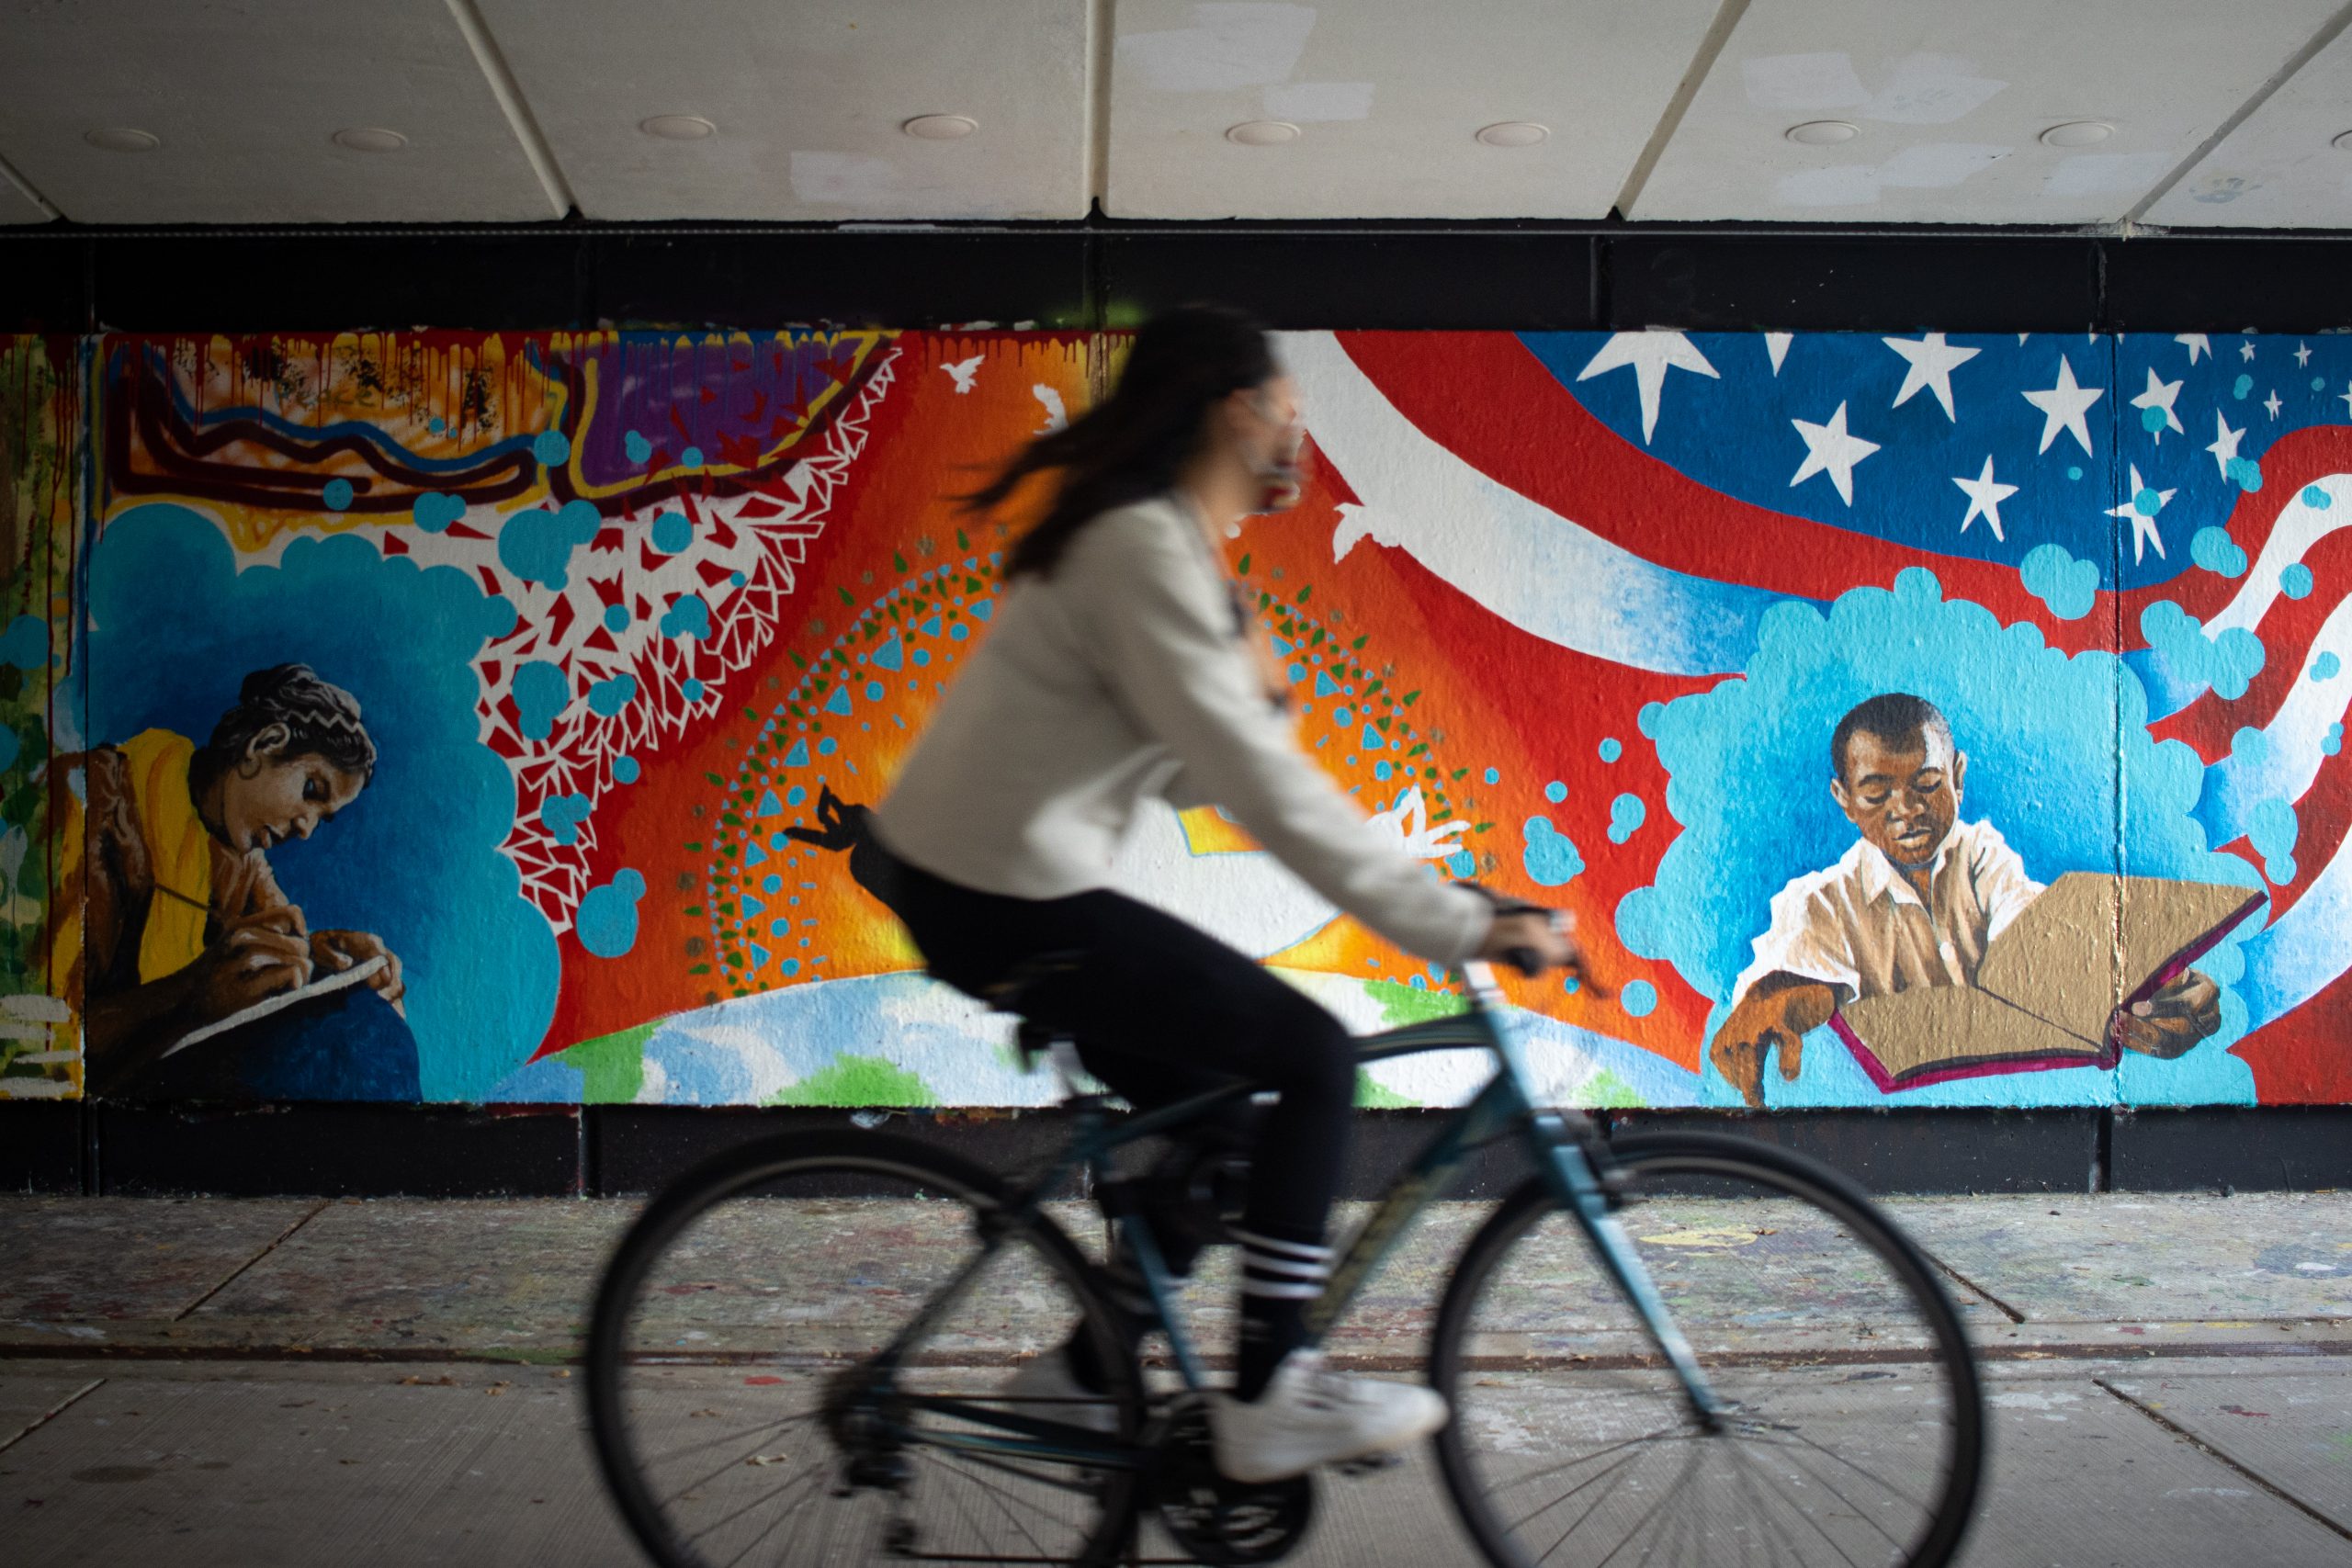 A person in a white shirt and black pants bicycles to the right in front of a colorful mural that displays an orange sunrise, a stylization of the American flag in the upper right hand corner and a man in the lower right hand corner.